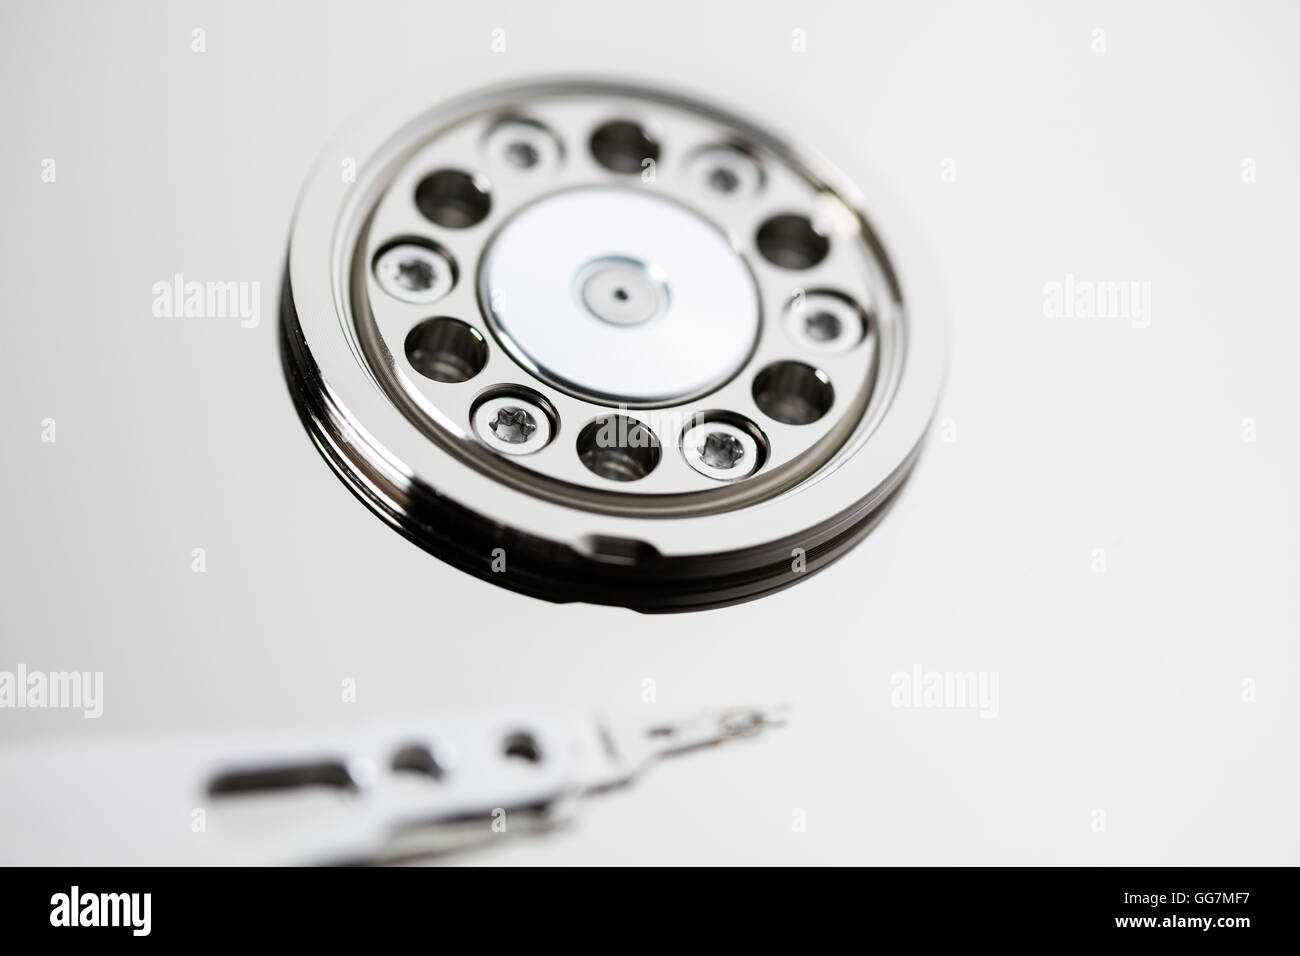 computer hard drive, opened HDD drive, close up. Stock Photo